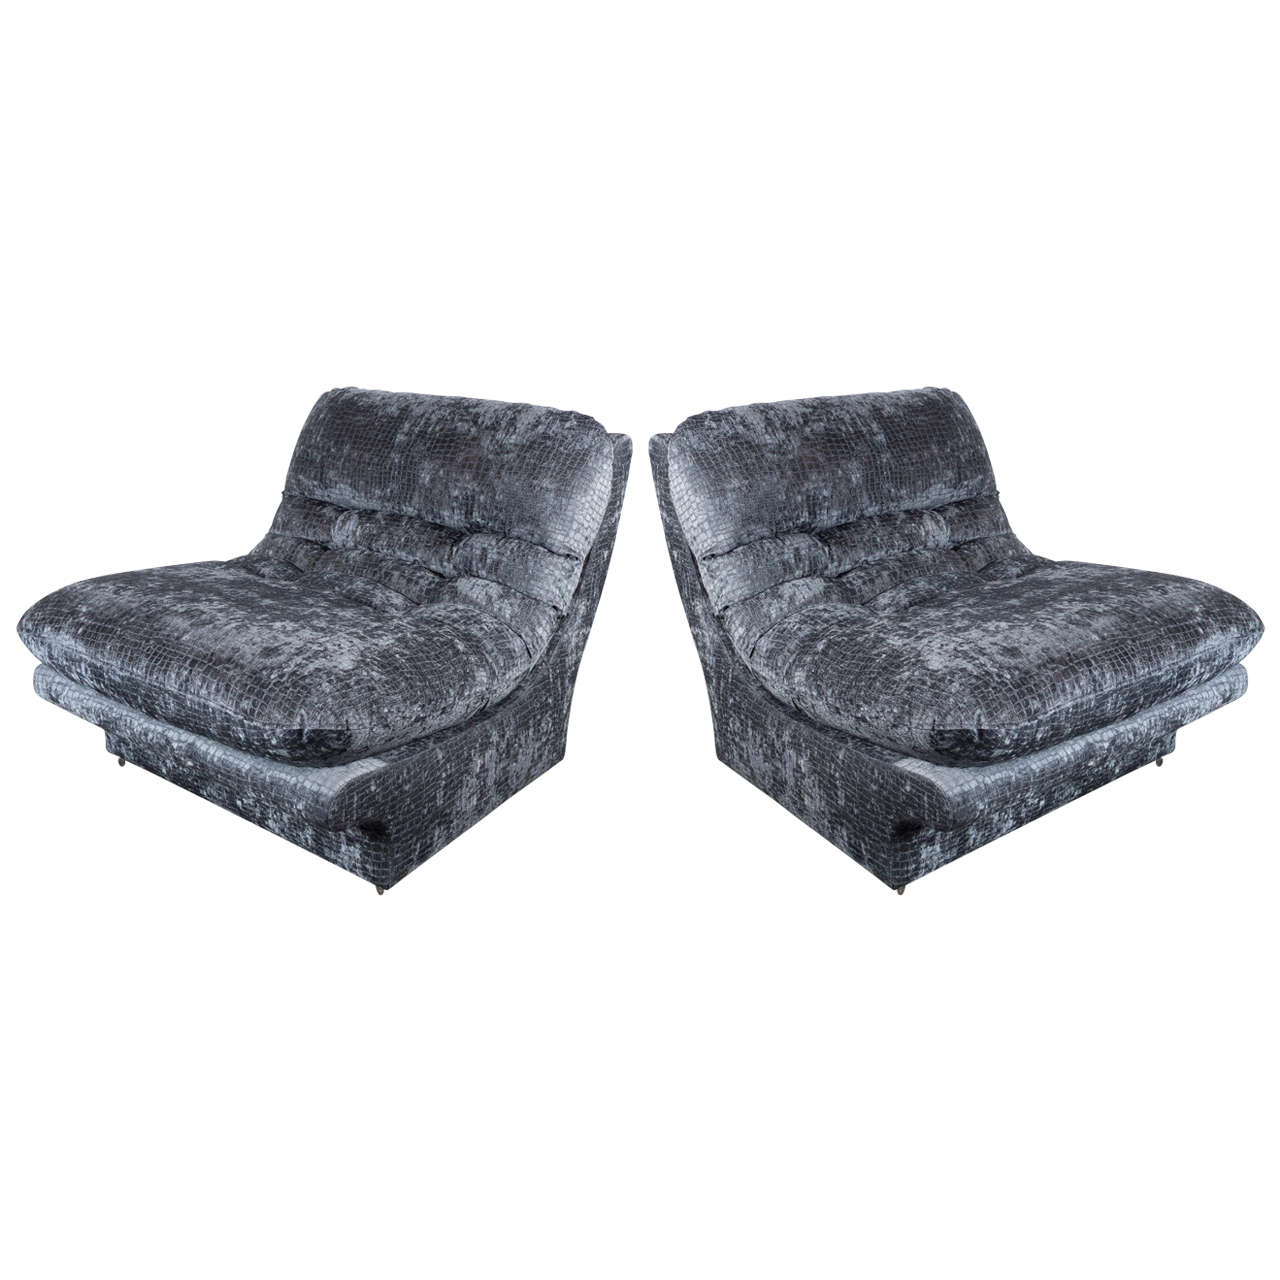 Pair of Slipper Lounge Chairs in Smoked Pewter Velvet in the Manner of Kagan